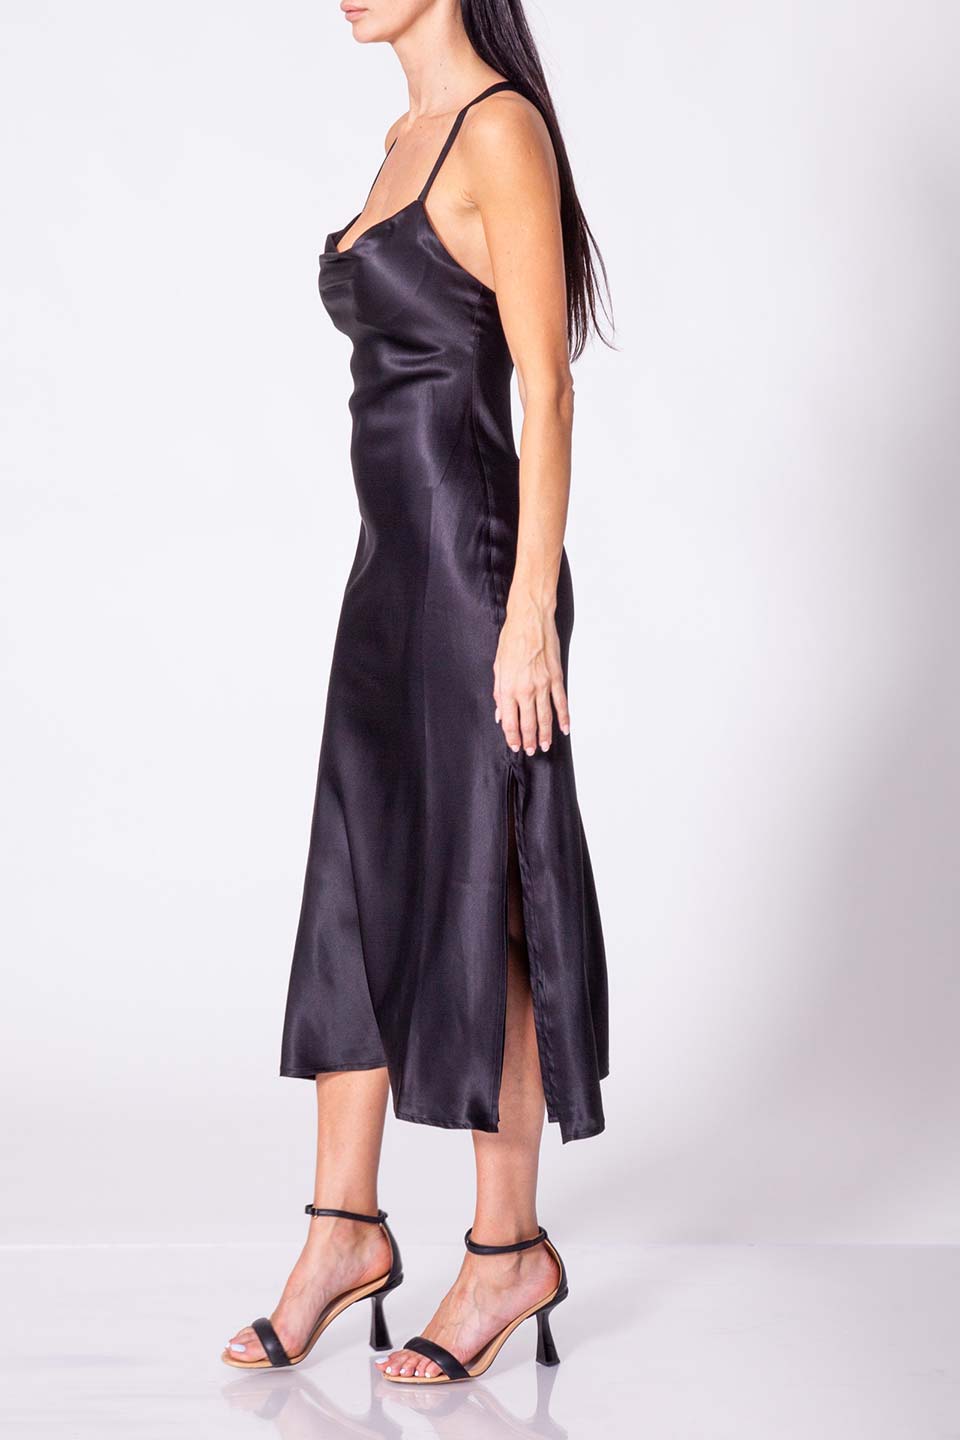 Thumbnail for Product gallery 3, Violante nessi calder dress black side